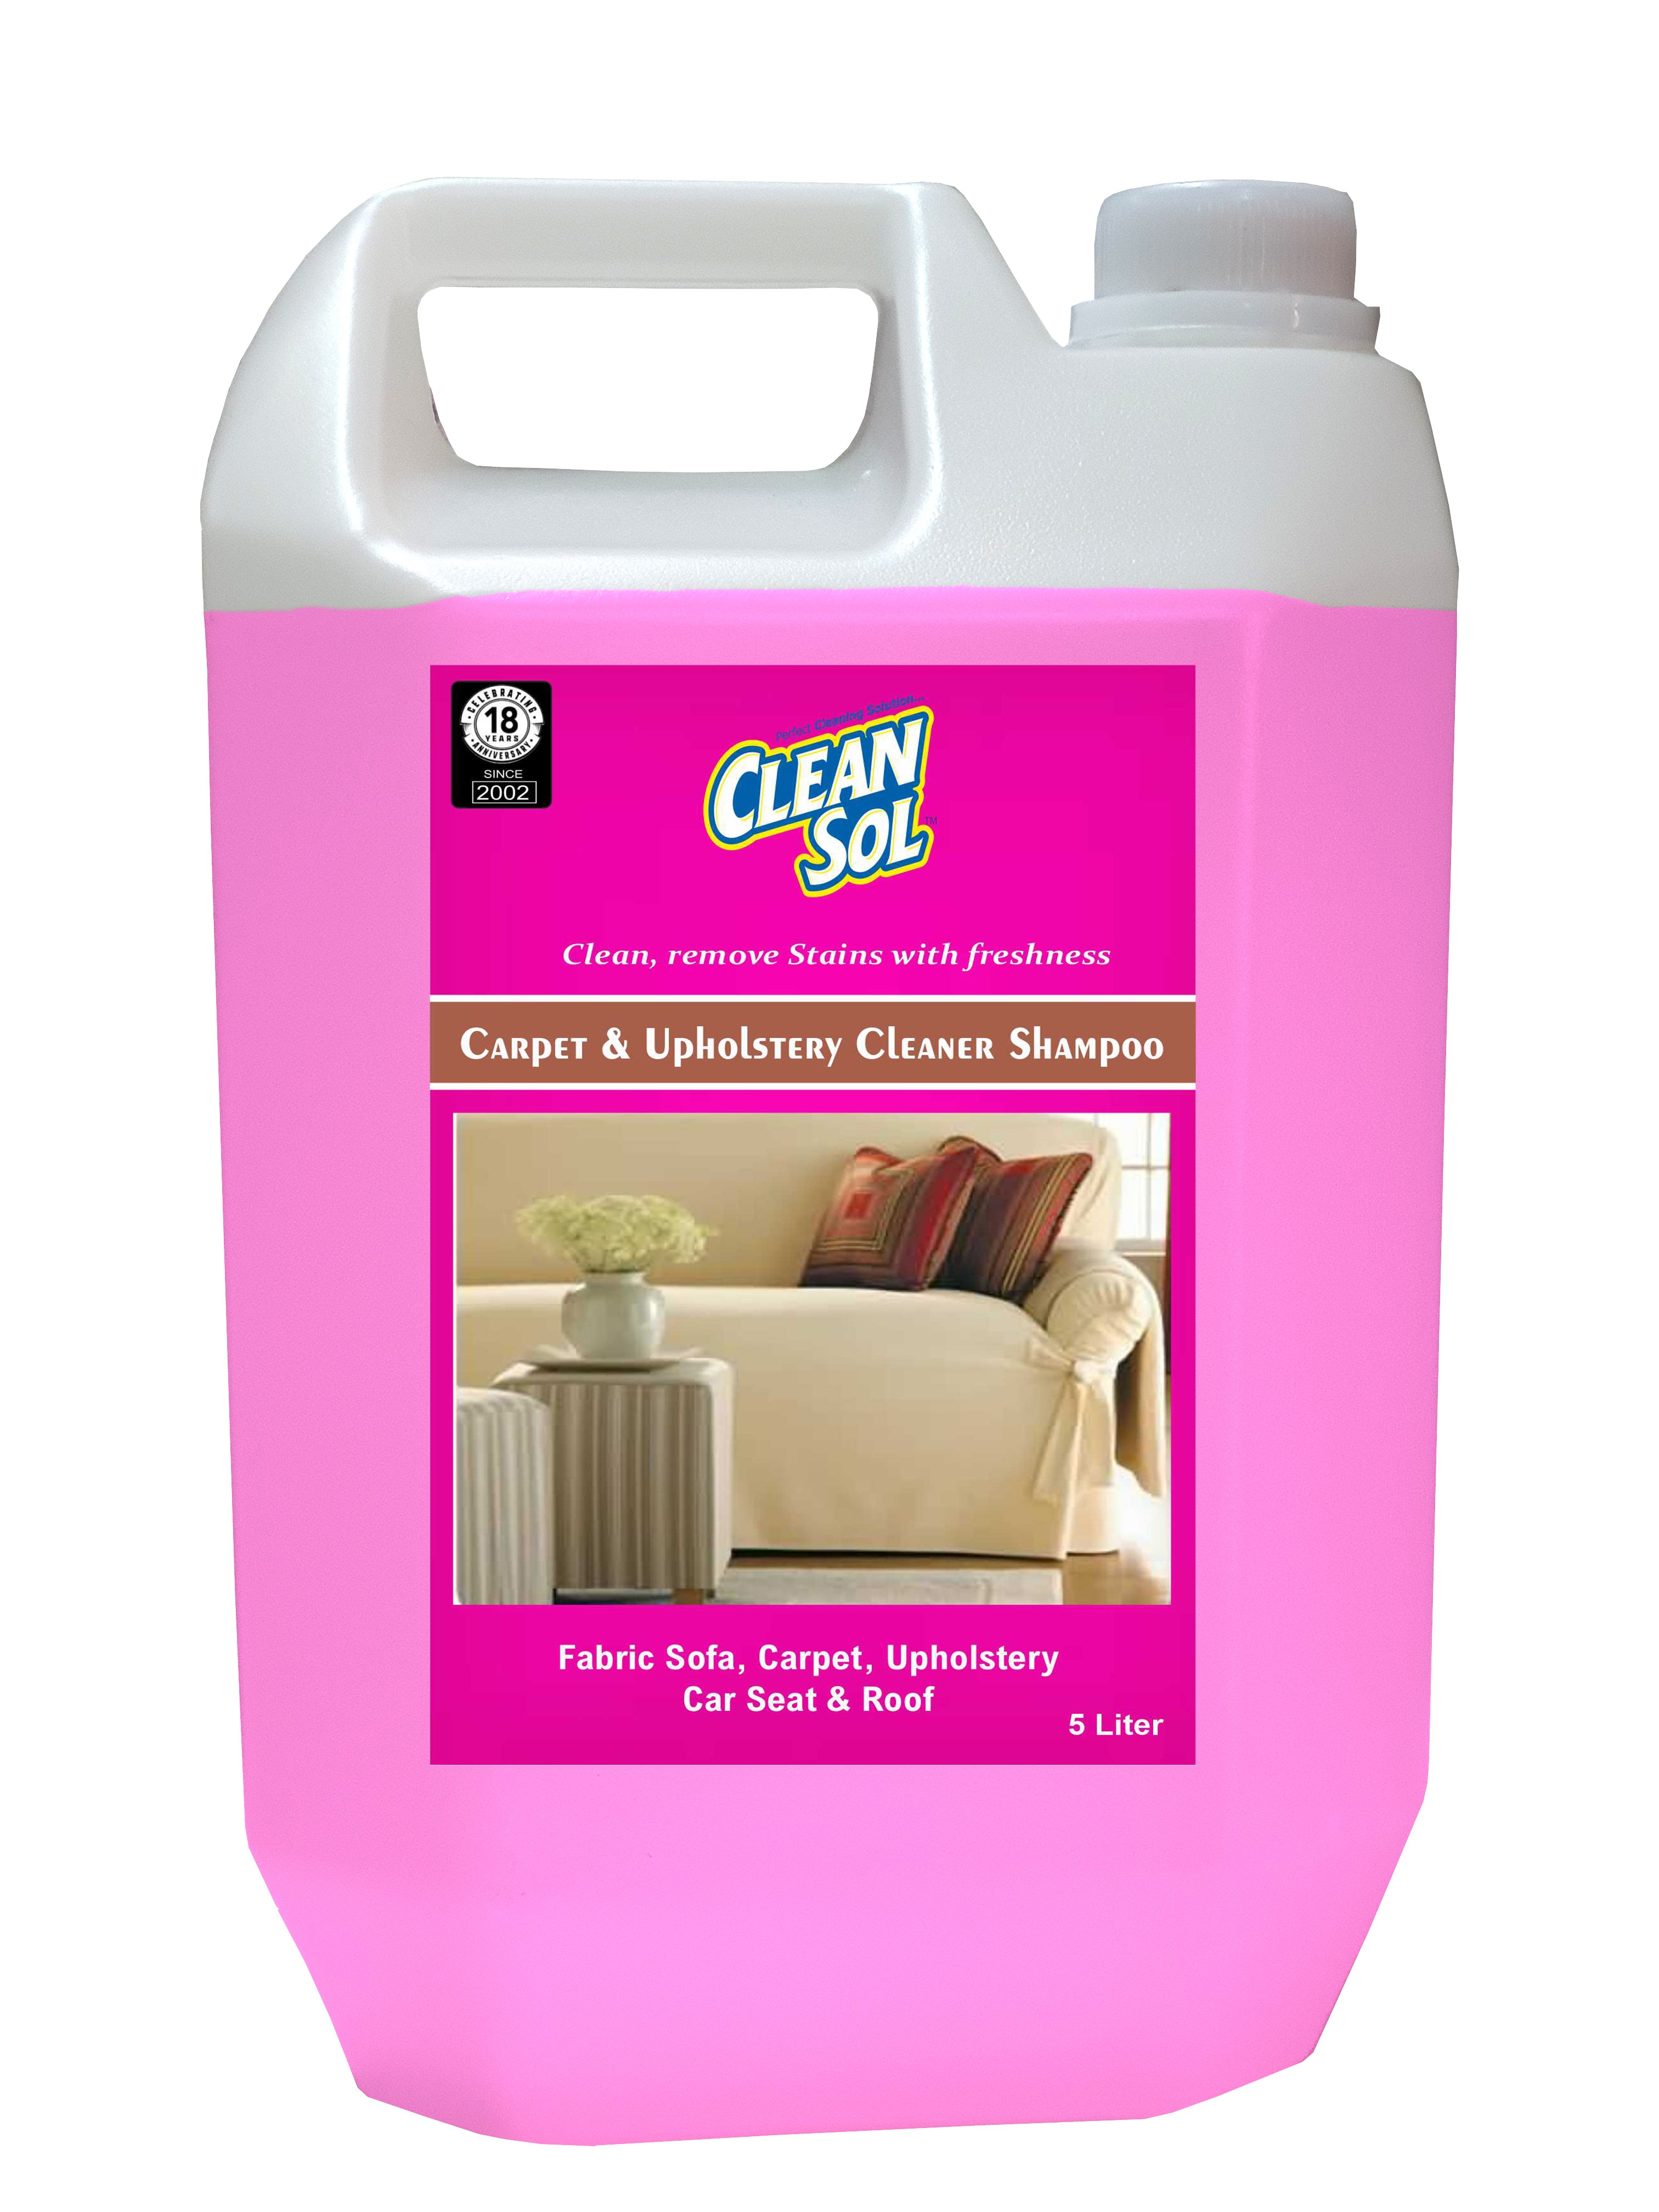 Cleansol Carpet & Upholstery Cleaner Liquid Shampoo – 5 liter